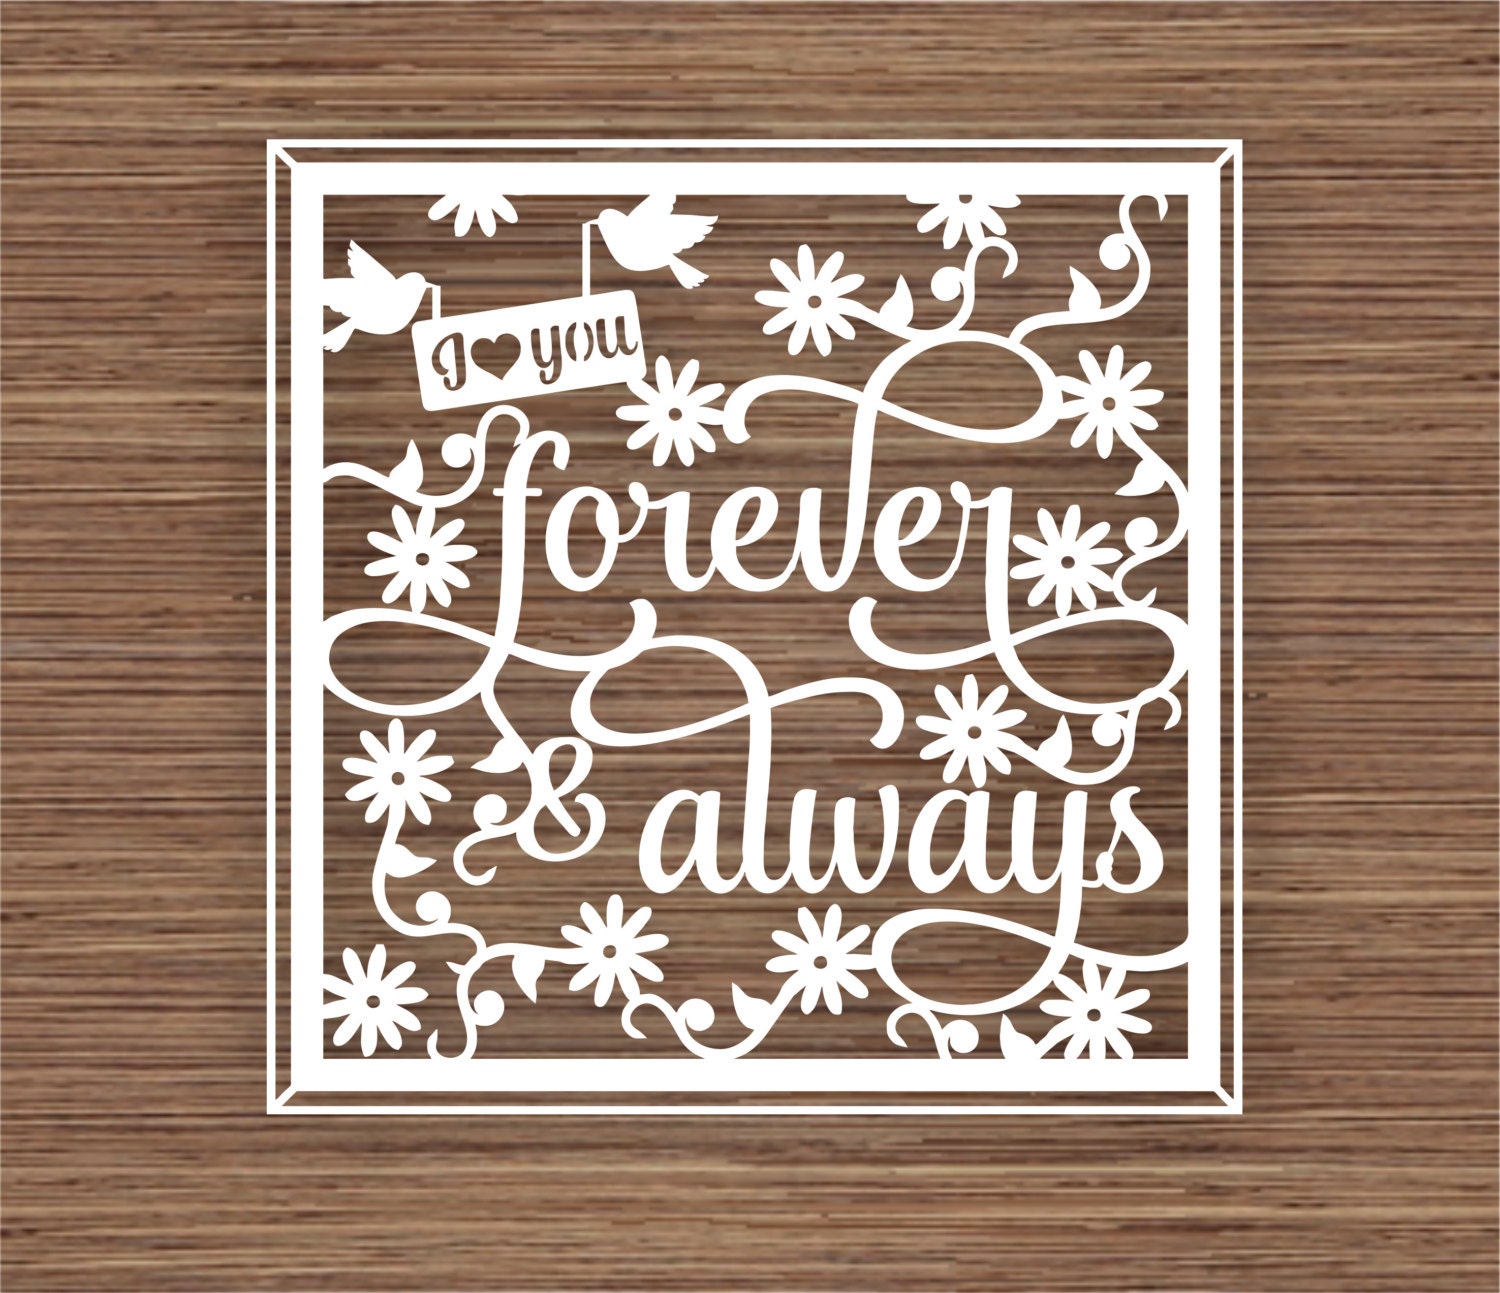 Download I love you forever and always PDF SVG Commercial Use Instant